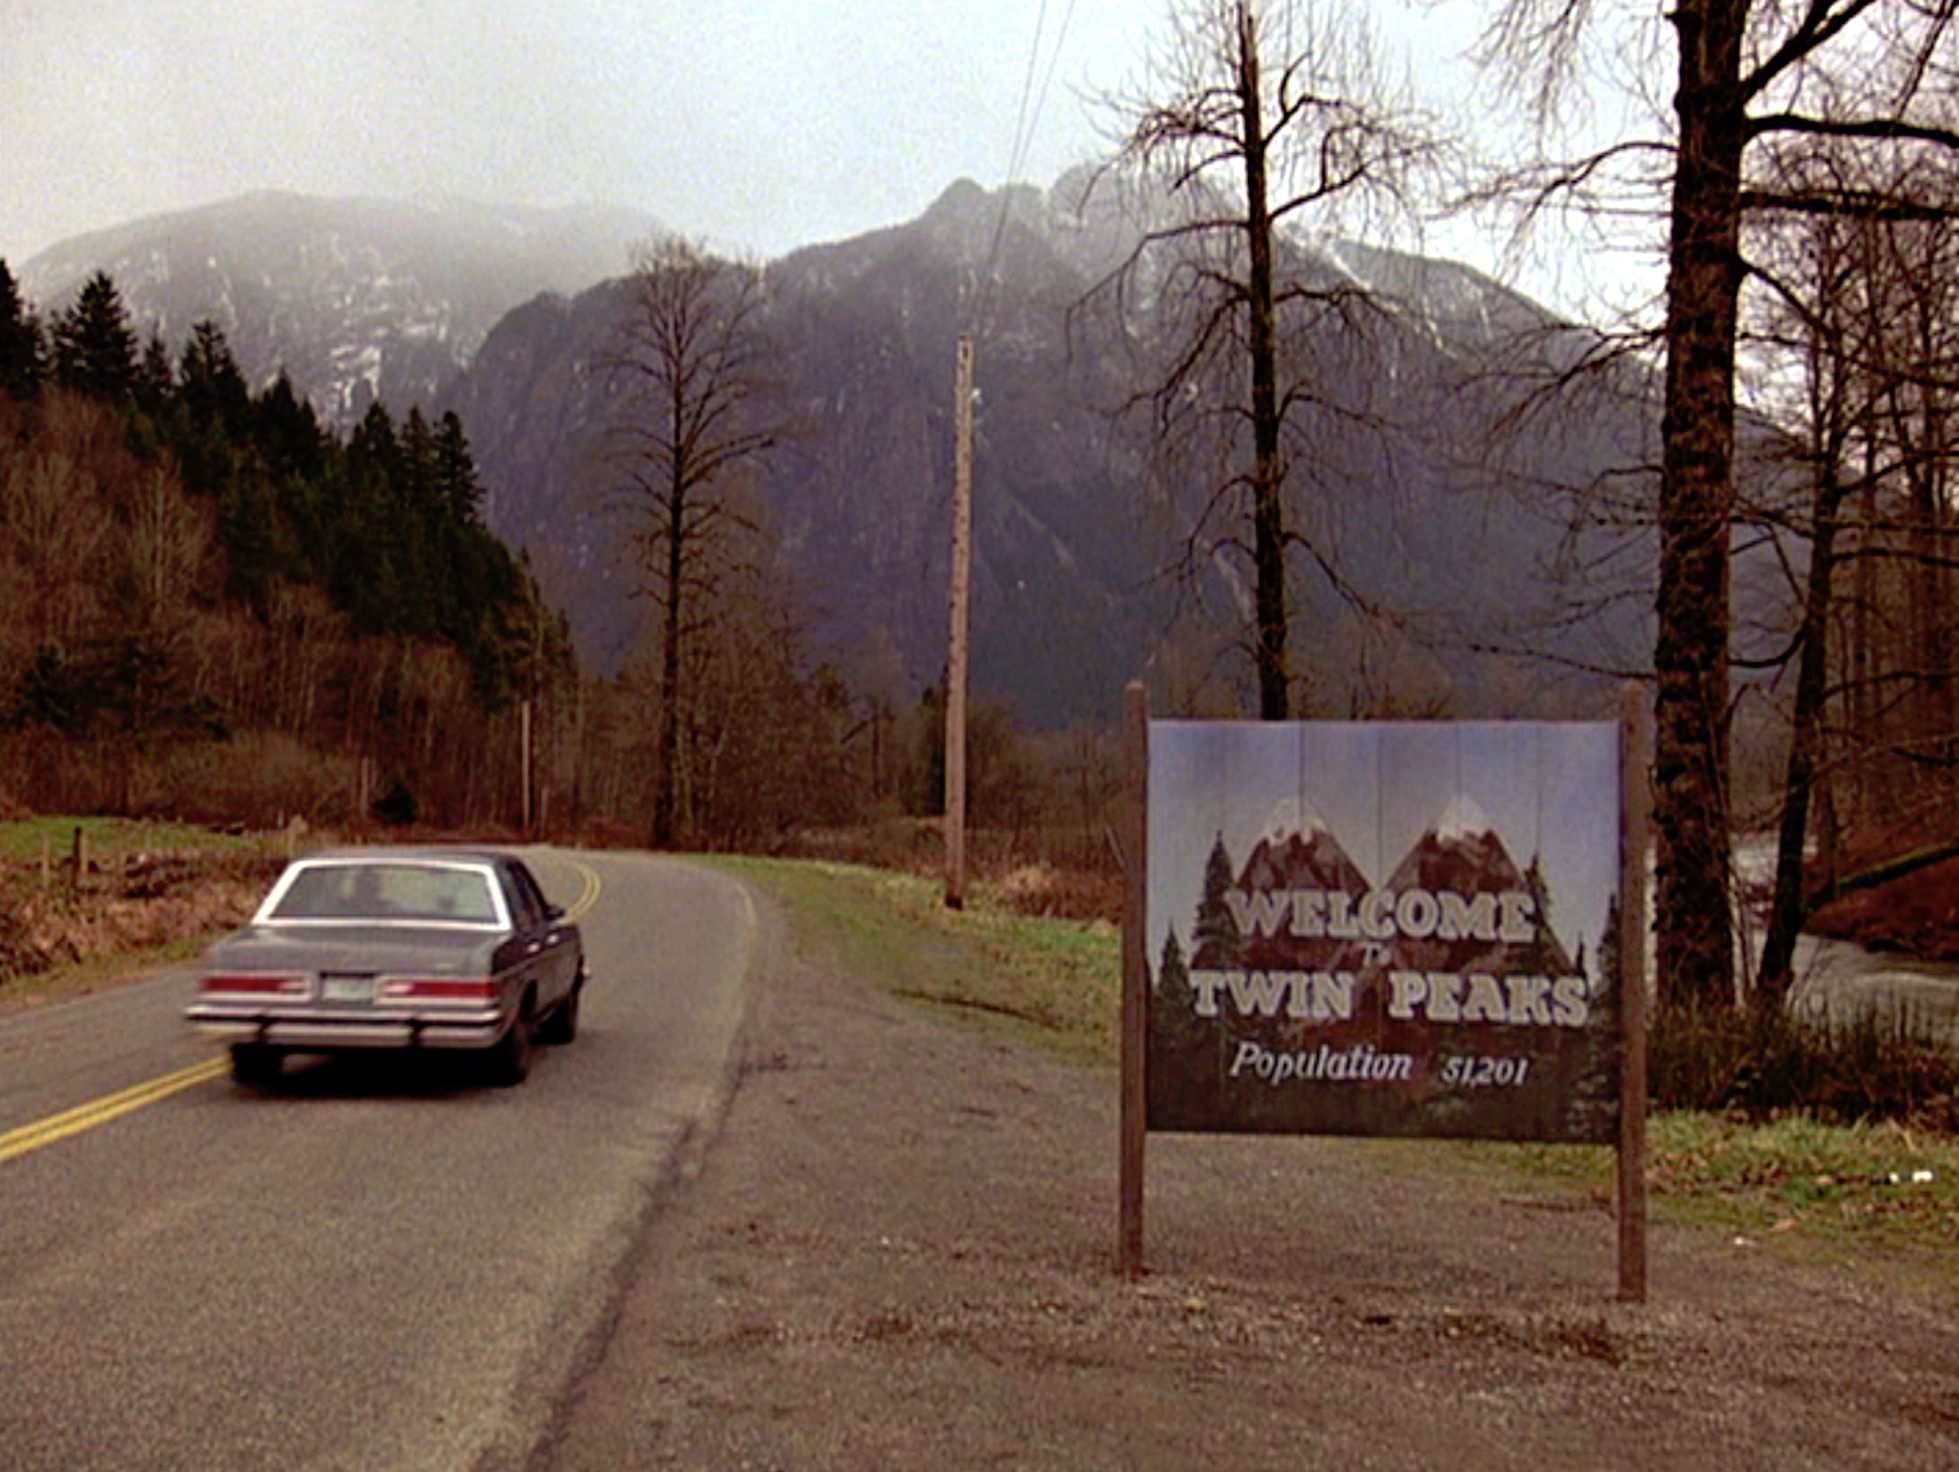 'Twin Peaks' welcome sign in front of a giant mountain